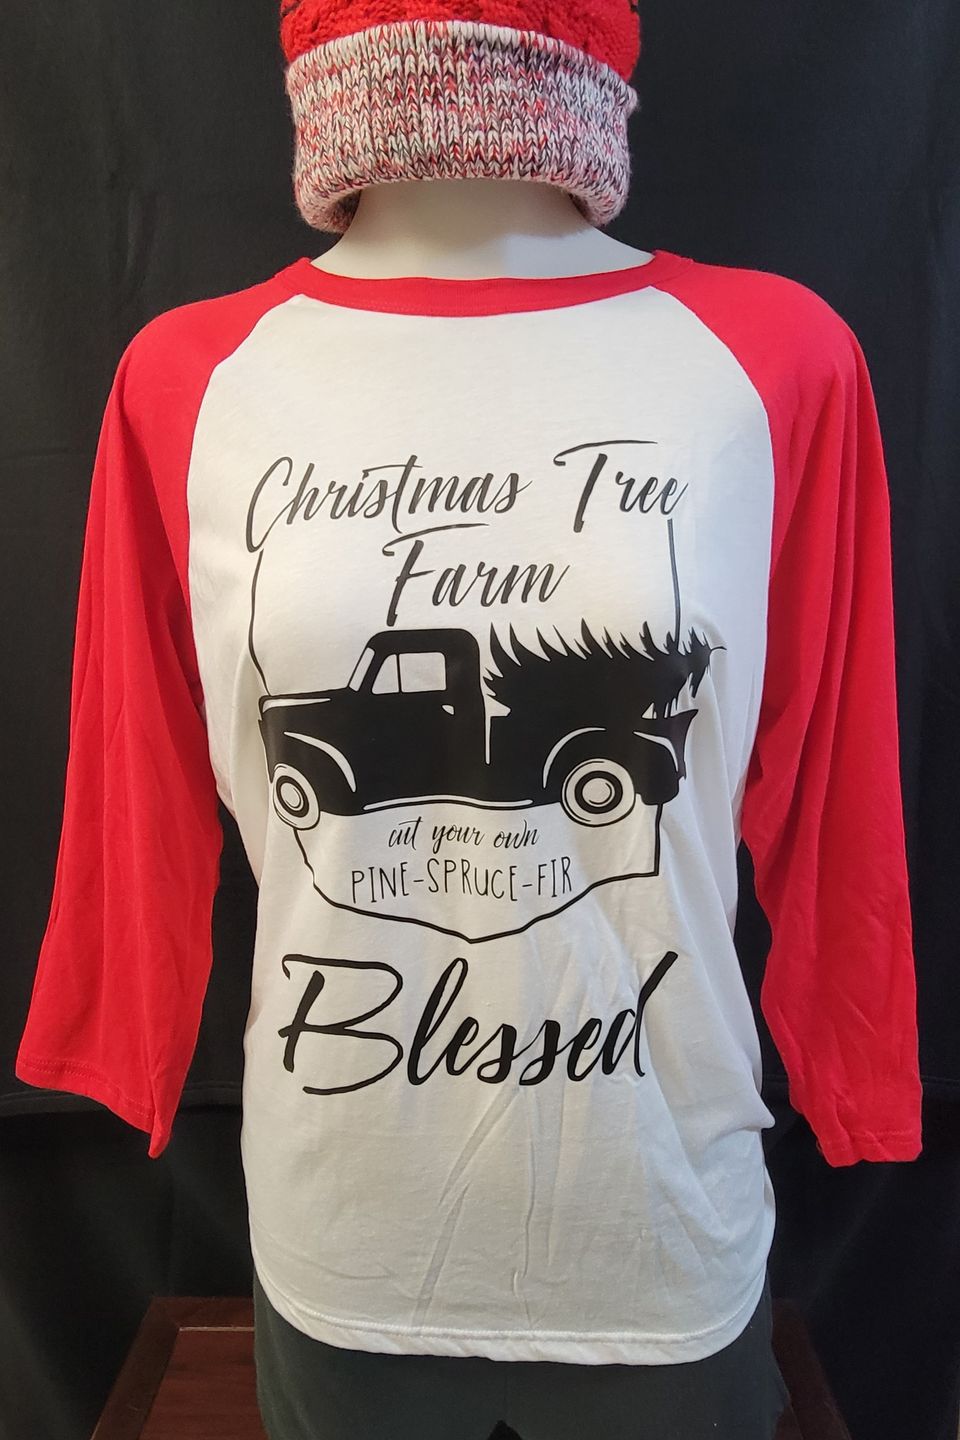 "DTF Direct-to-Film" example T-shirt - "Christmas Tree Farm"